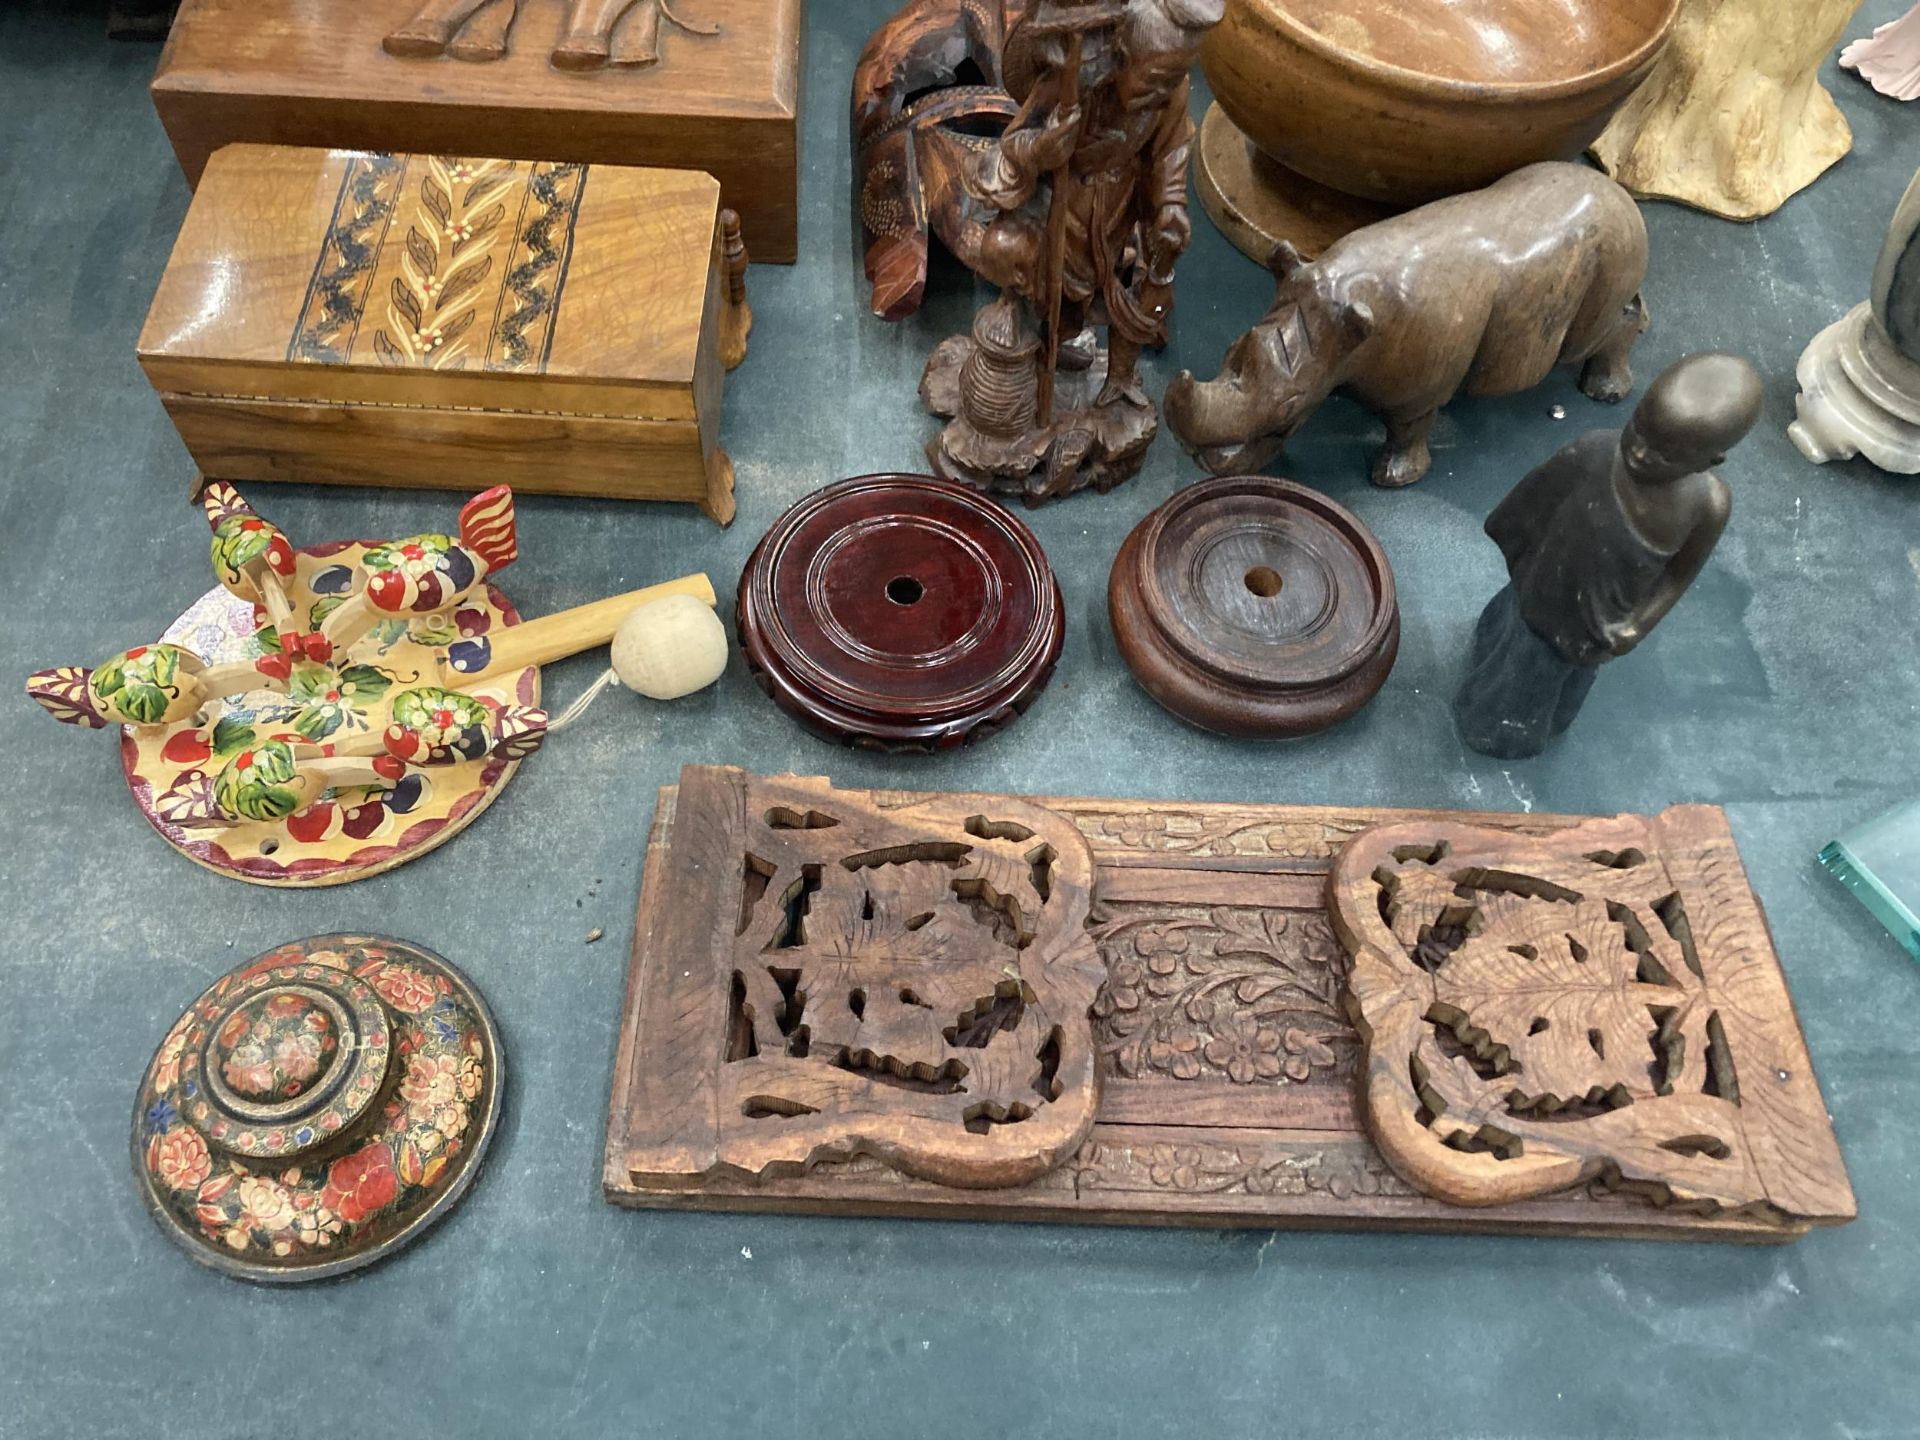 A LARGE QUANTITY OF TREEN ITEMS TO INCLUDE A SLIDING BOOKSHELF, BOXES, FIGURES, A BUST MANTLE CLOCK, - Image 2 of 3